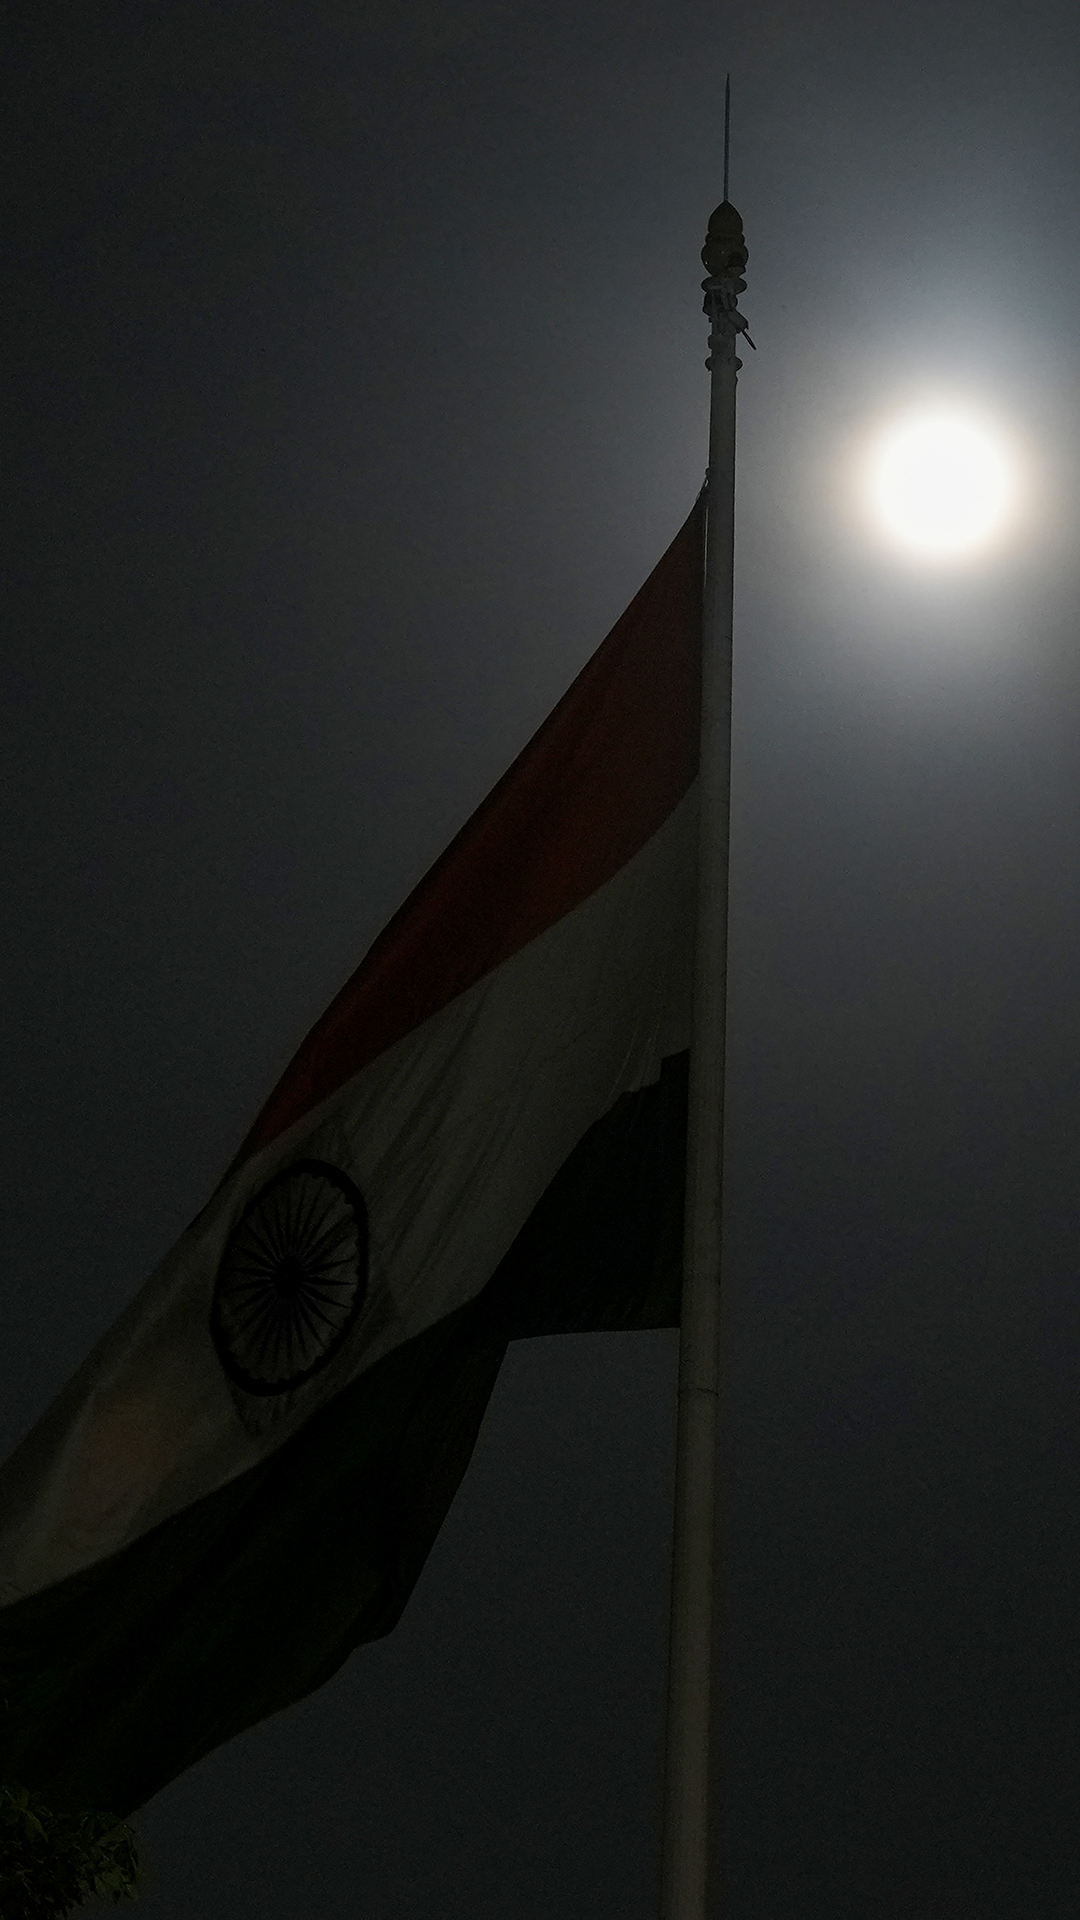 Supermoon behind the Indian tricolours, in New Delhi